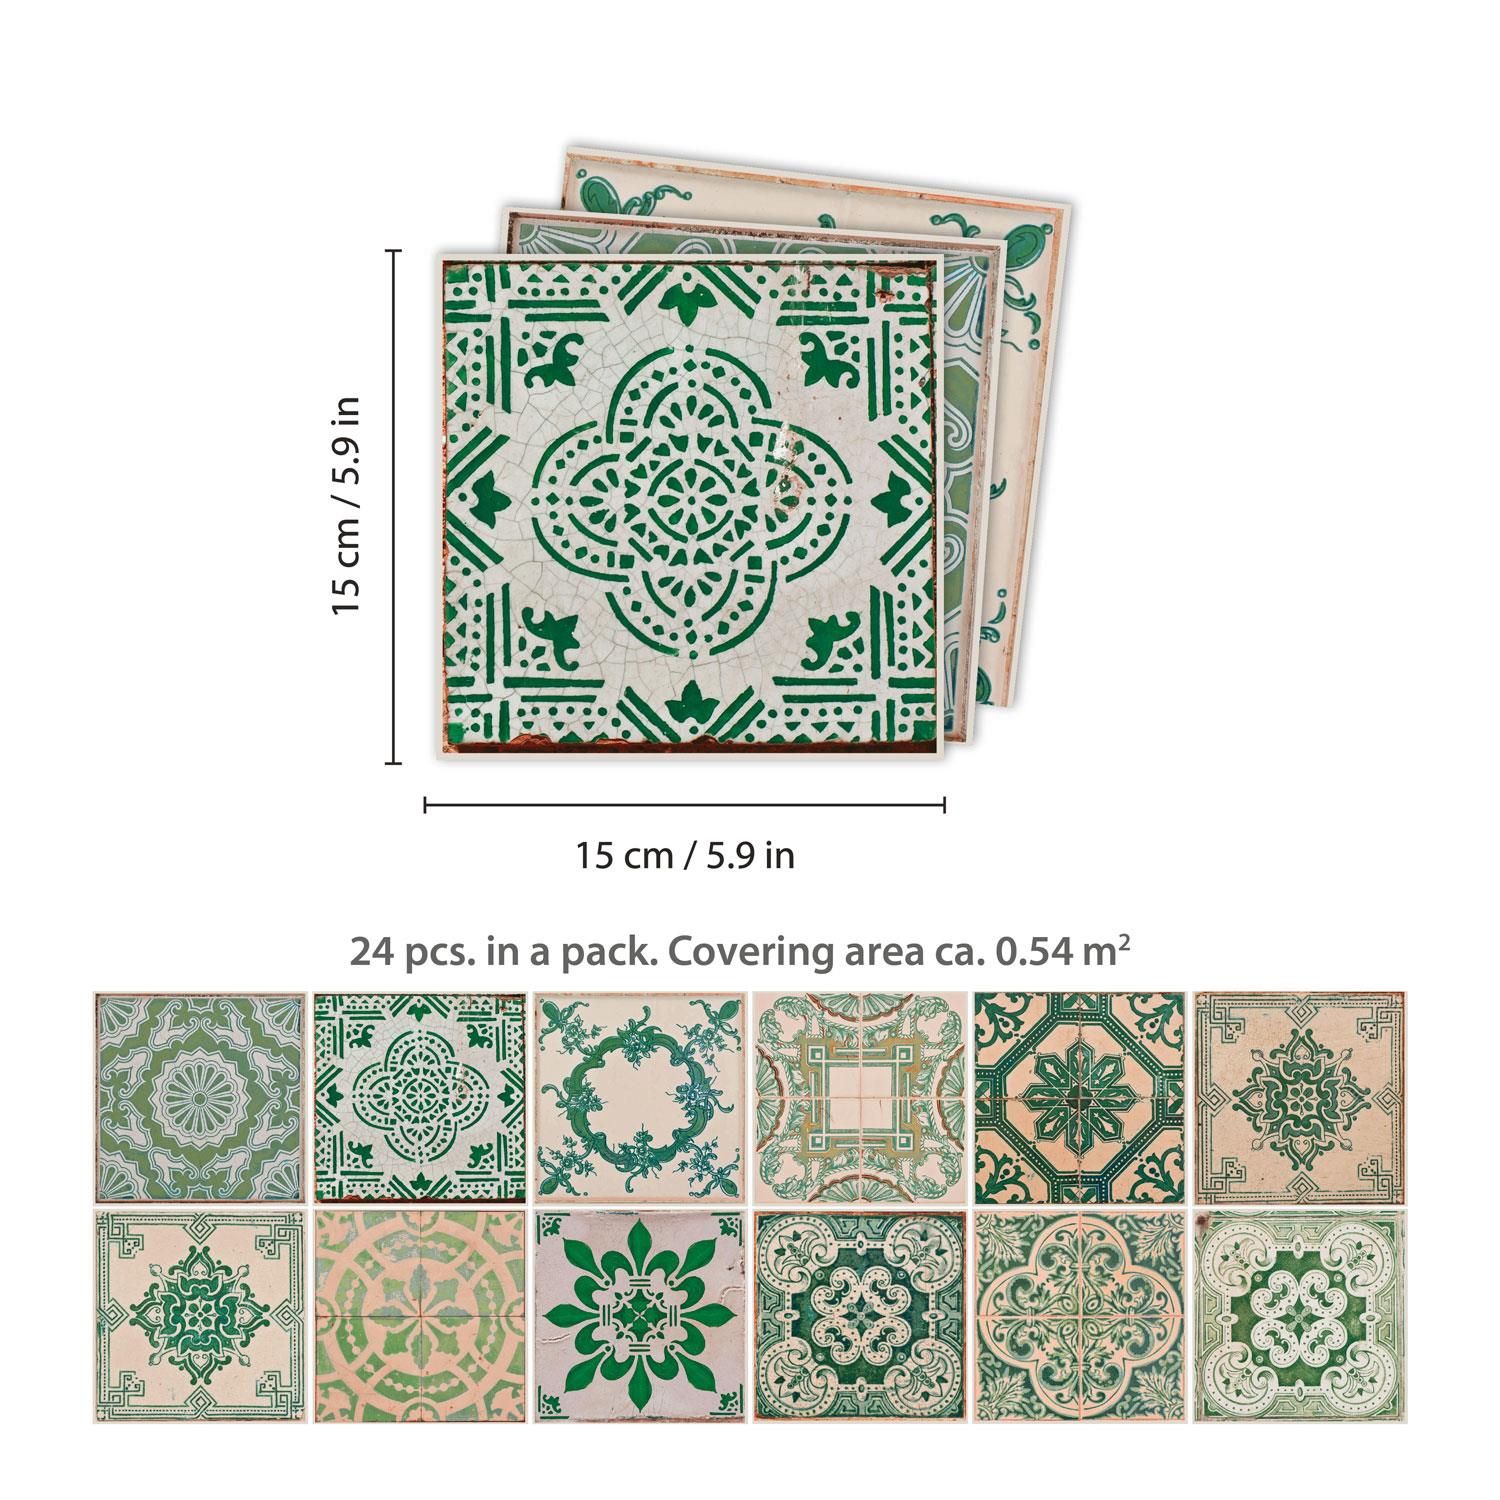 - Green pattern of azulejo was inspired by the vintage Spain tile art. The graceful combination of green and grey pattern bring you to the old town of Spain, as if the Mediterranean sun was just by your side.
- To apply, just peel and stick onto any clean, flat surfaces like wall, furniture or as window screen, and you are good to go! Easy to install and to remove without leaving a trace.
- Can be easily trimmed / cut to fit.
- Package Contains: 24 pieces of stickers 15 x 15 cm Coverage area: 0.54 square meters.